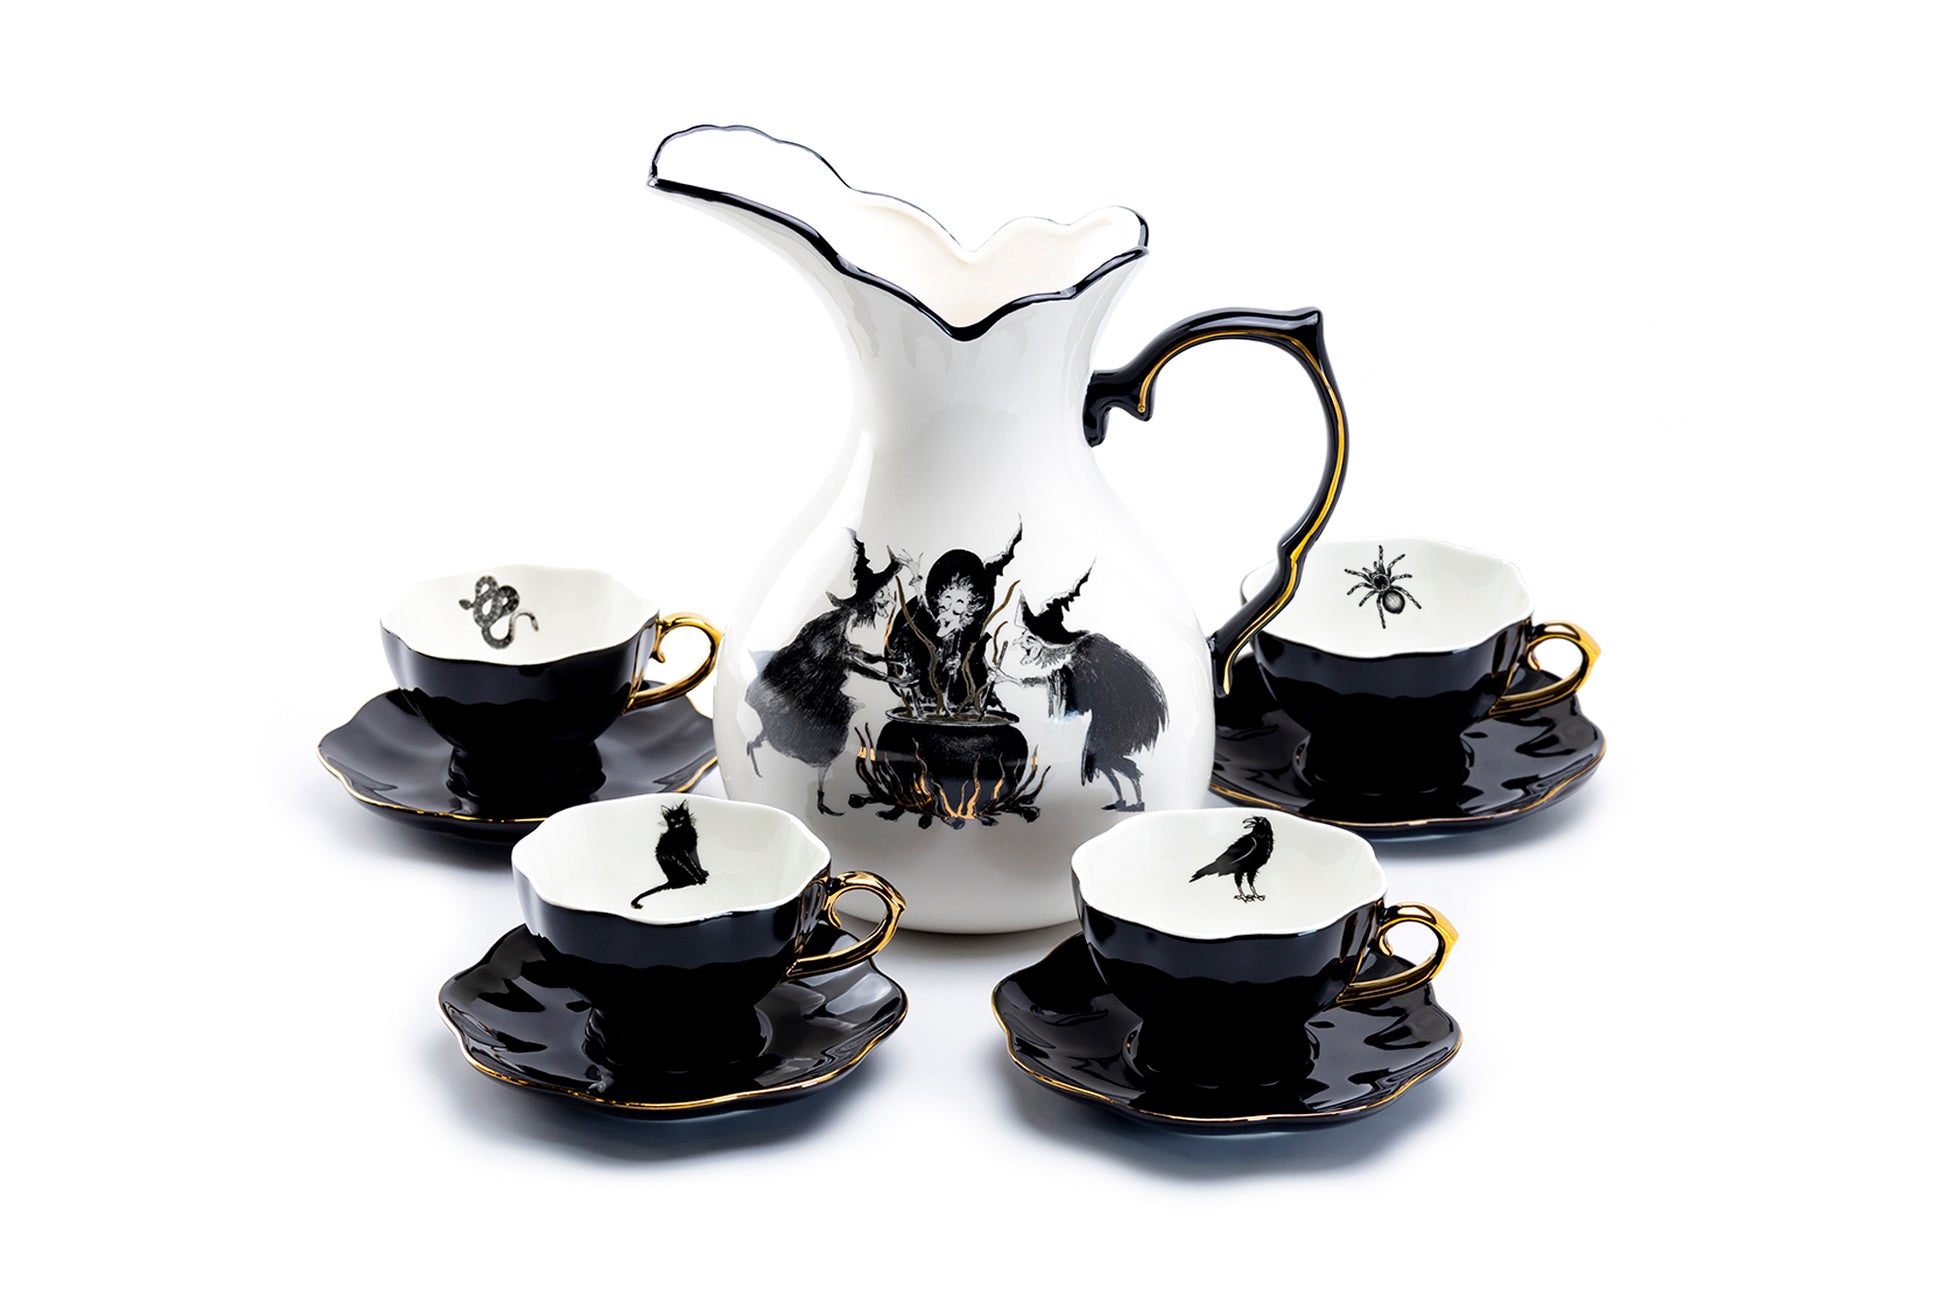 Potter's Studio Witches Brew Pitcher + 4 Assorted Halloween Tea Cup and Saucer Sets - black cat, crow raven, snake, spider tea cups